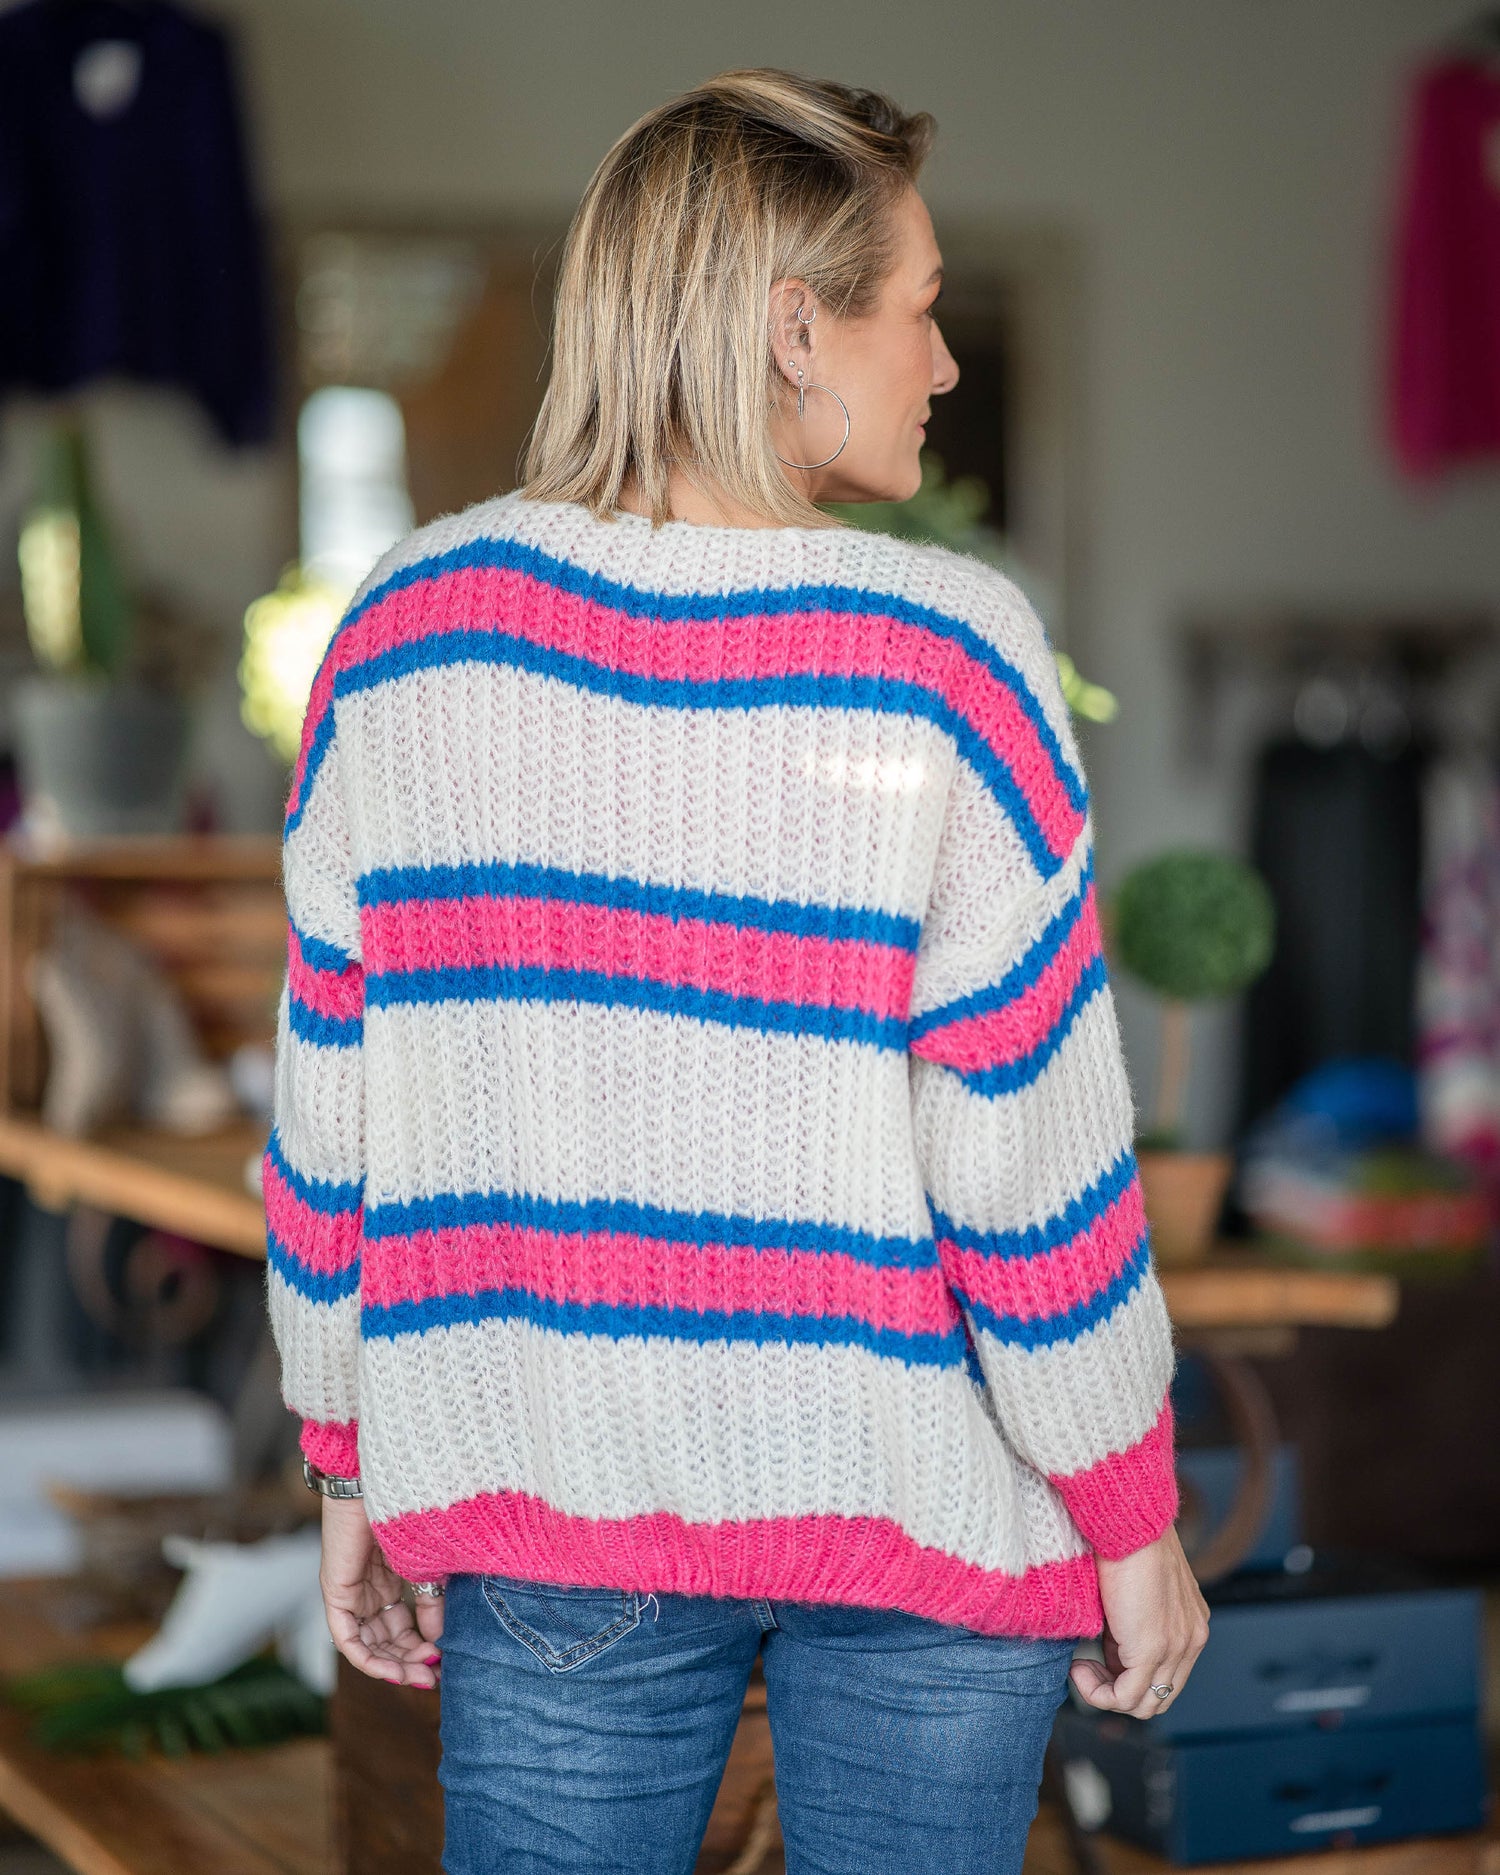 This cardigan is excellent for layering that can add warmth and versatility to your outfit. Stripes are incredibly versatile and can be paired with a variety of other patterns or solid colors. They can be dressed up or down, making them suitable for various occasions and seasons